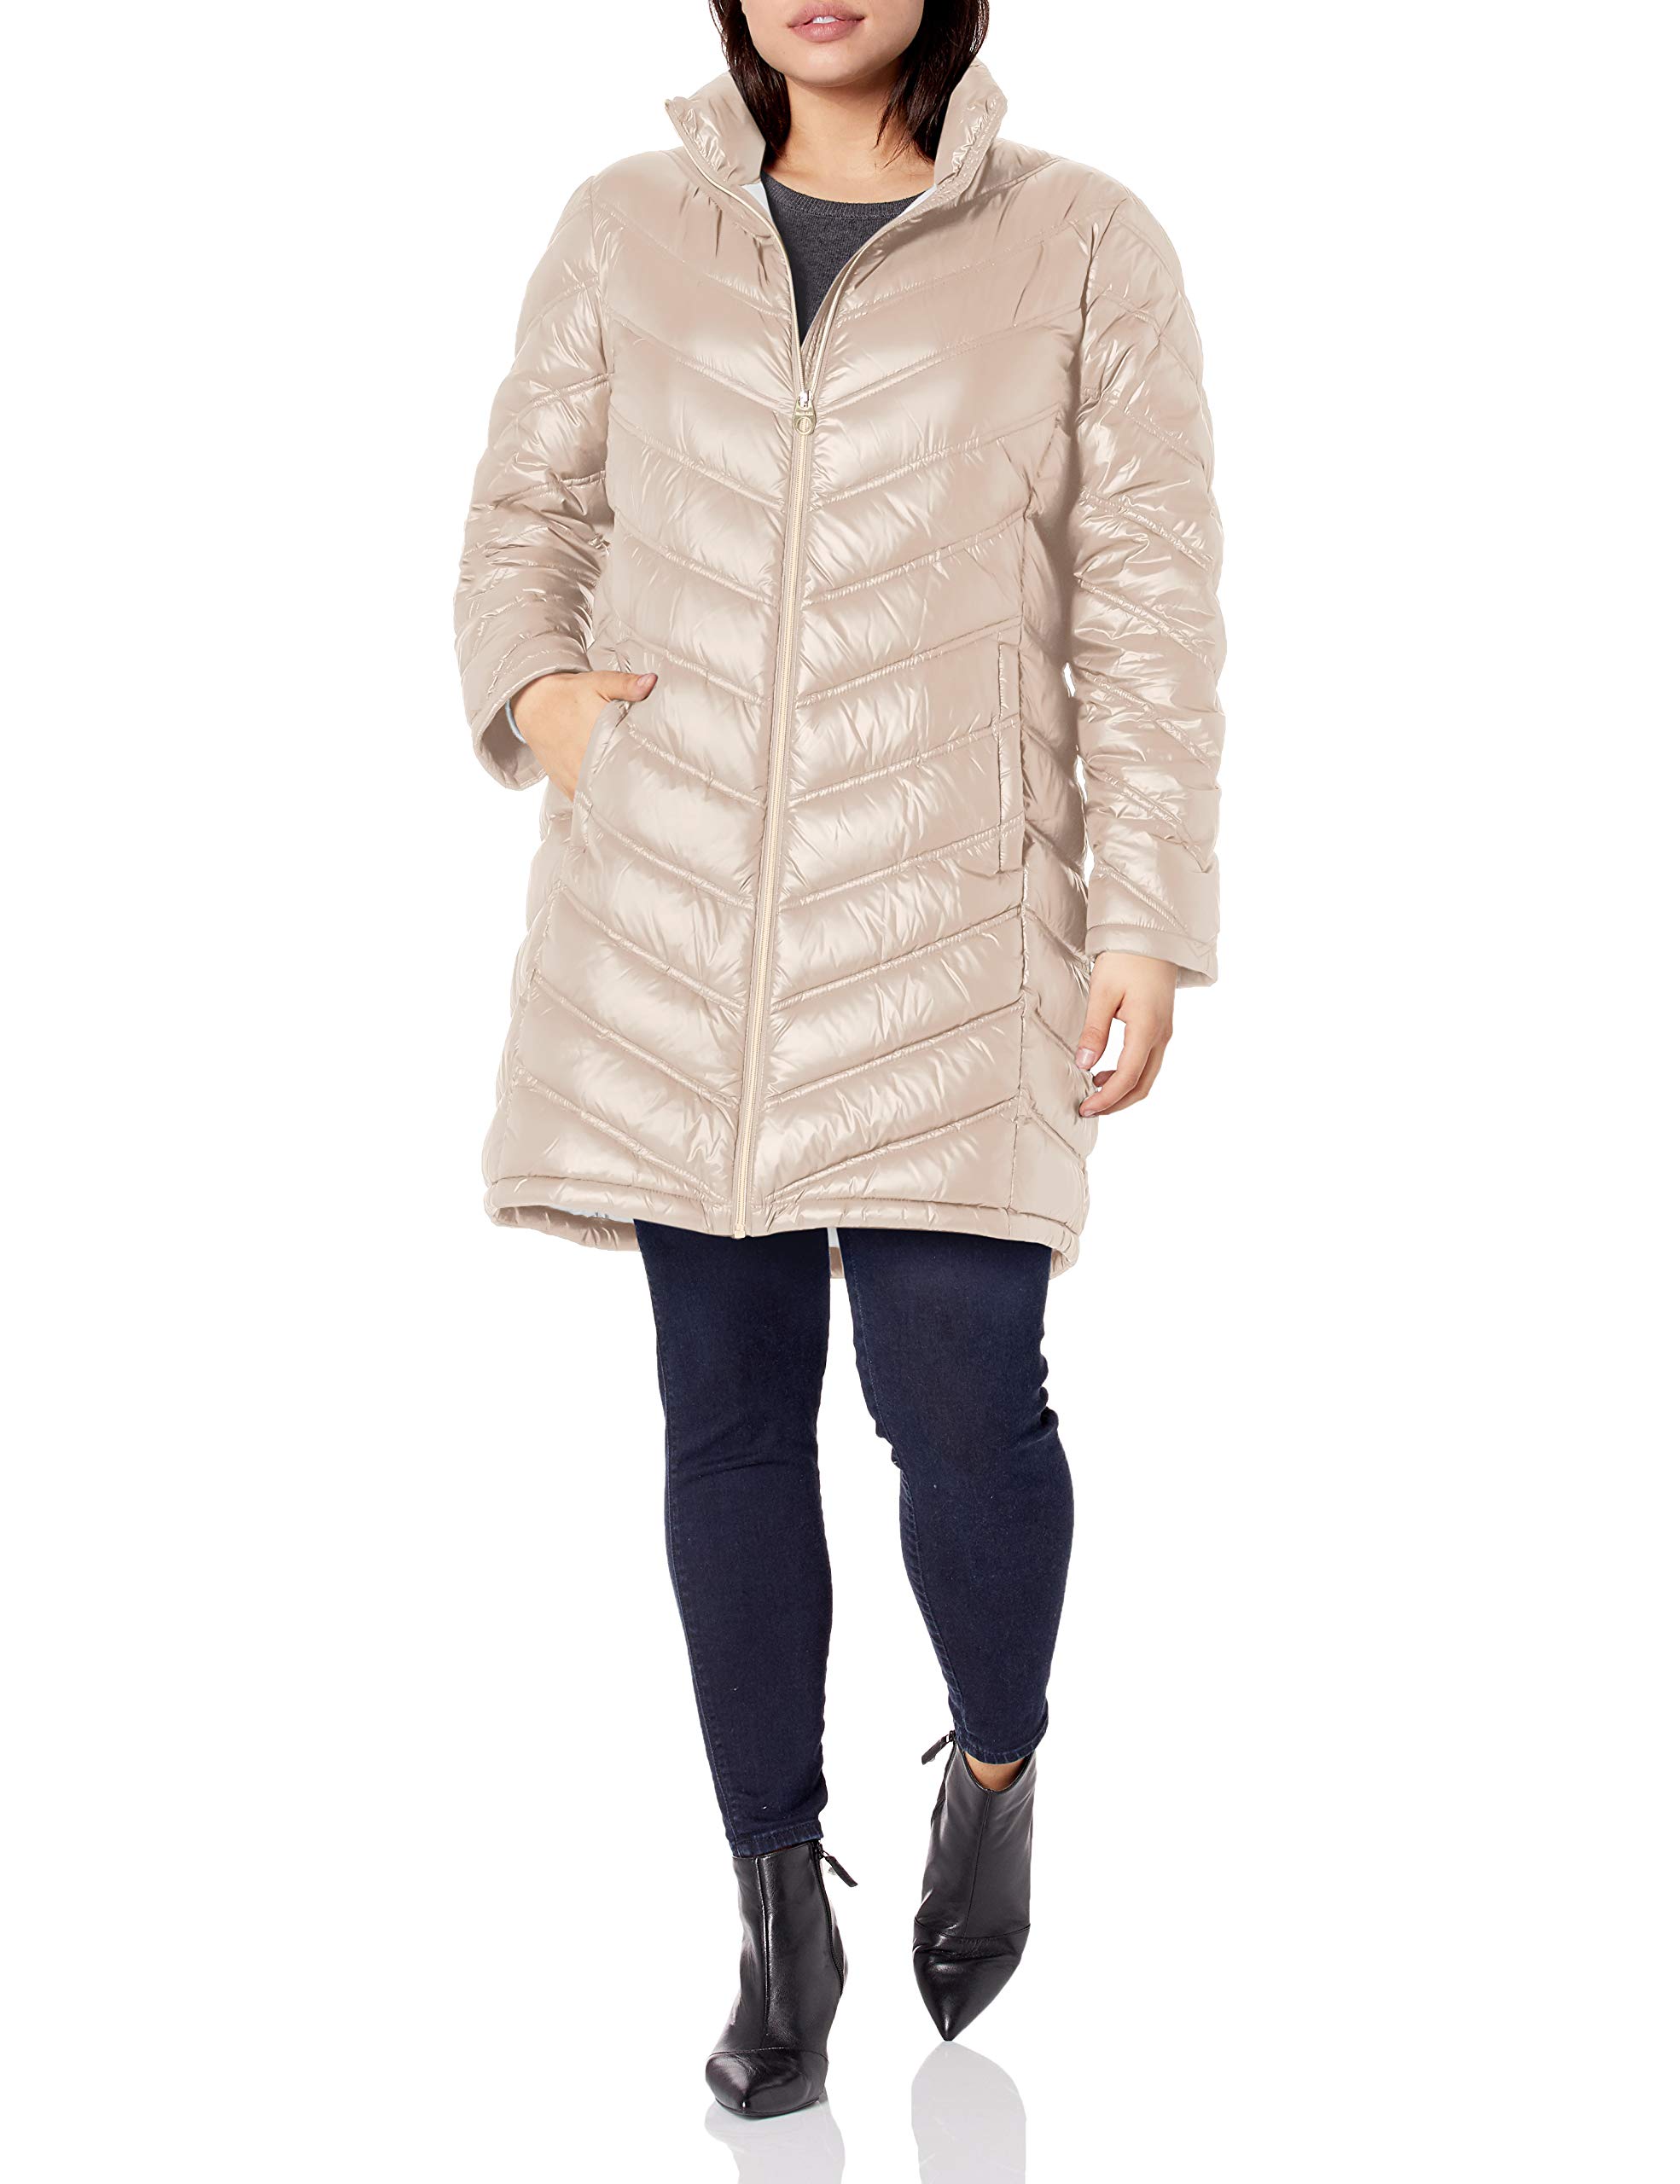 Calvin Klein Women's Chevron Quilted Packable Down Jacket (Standard and Plus)